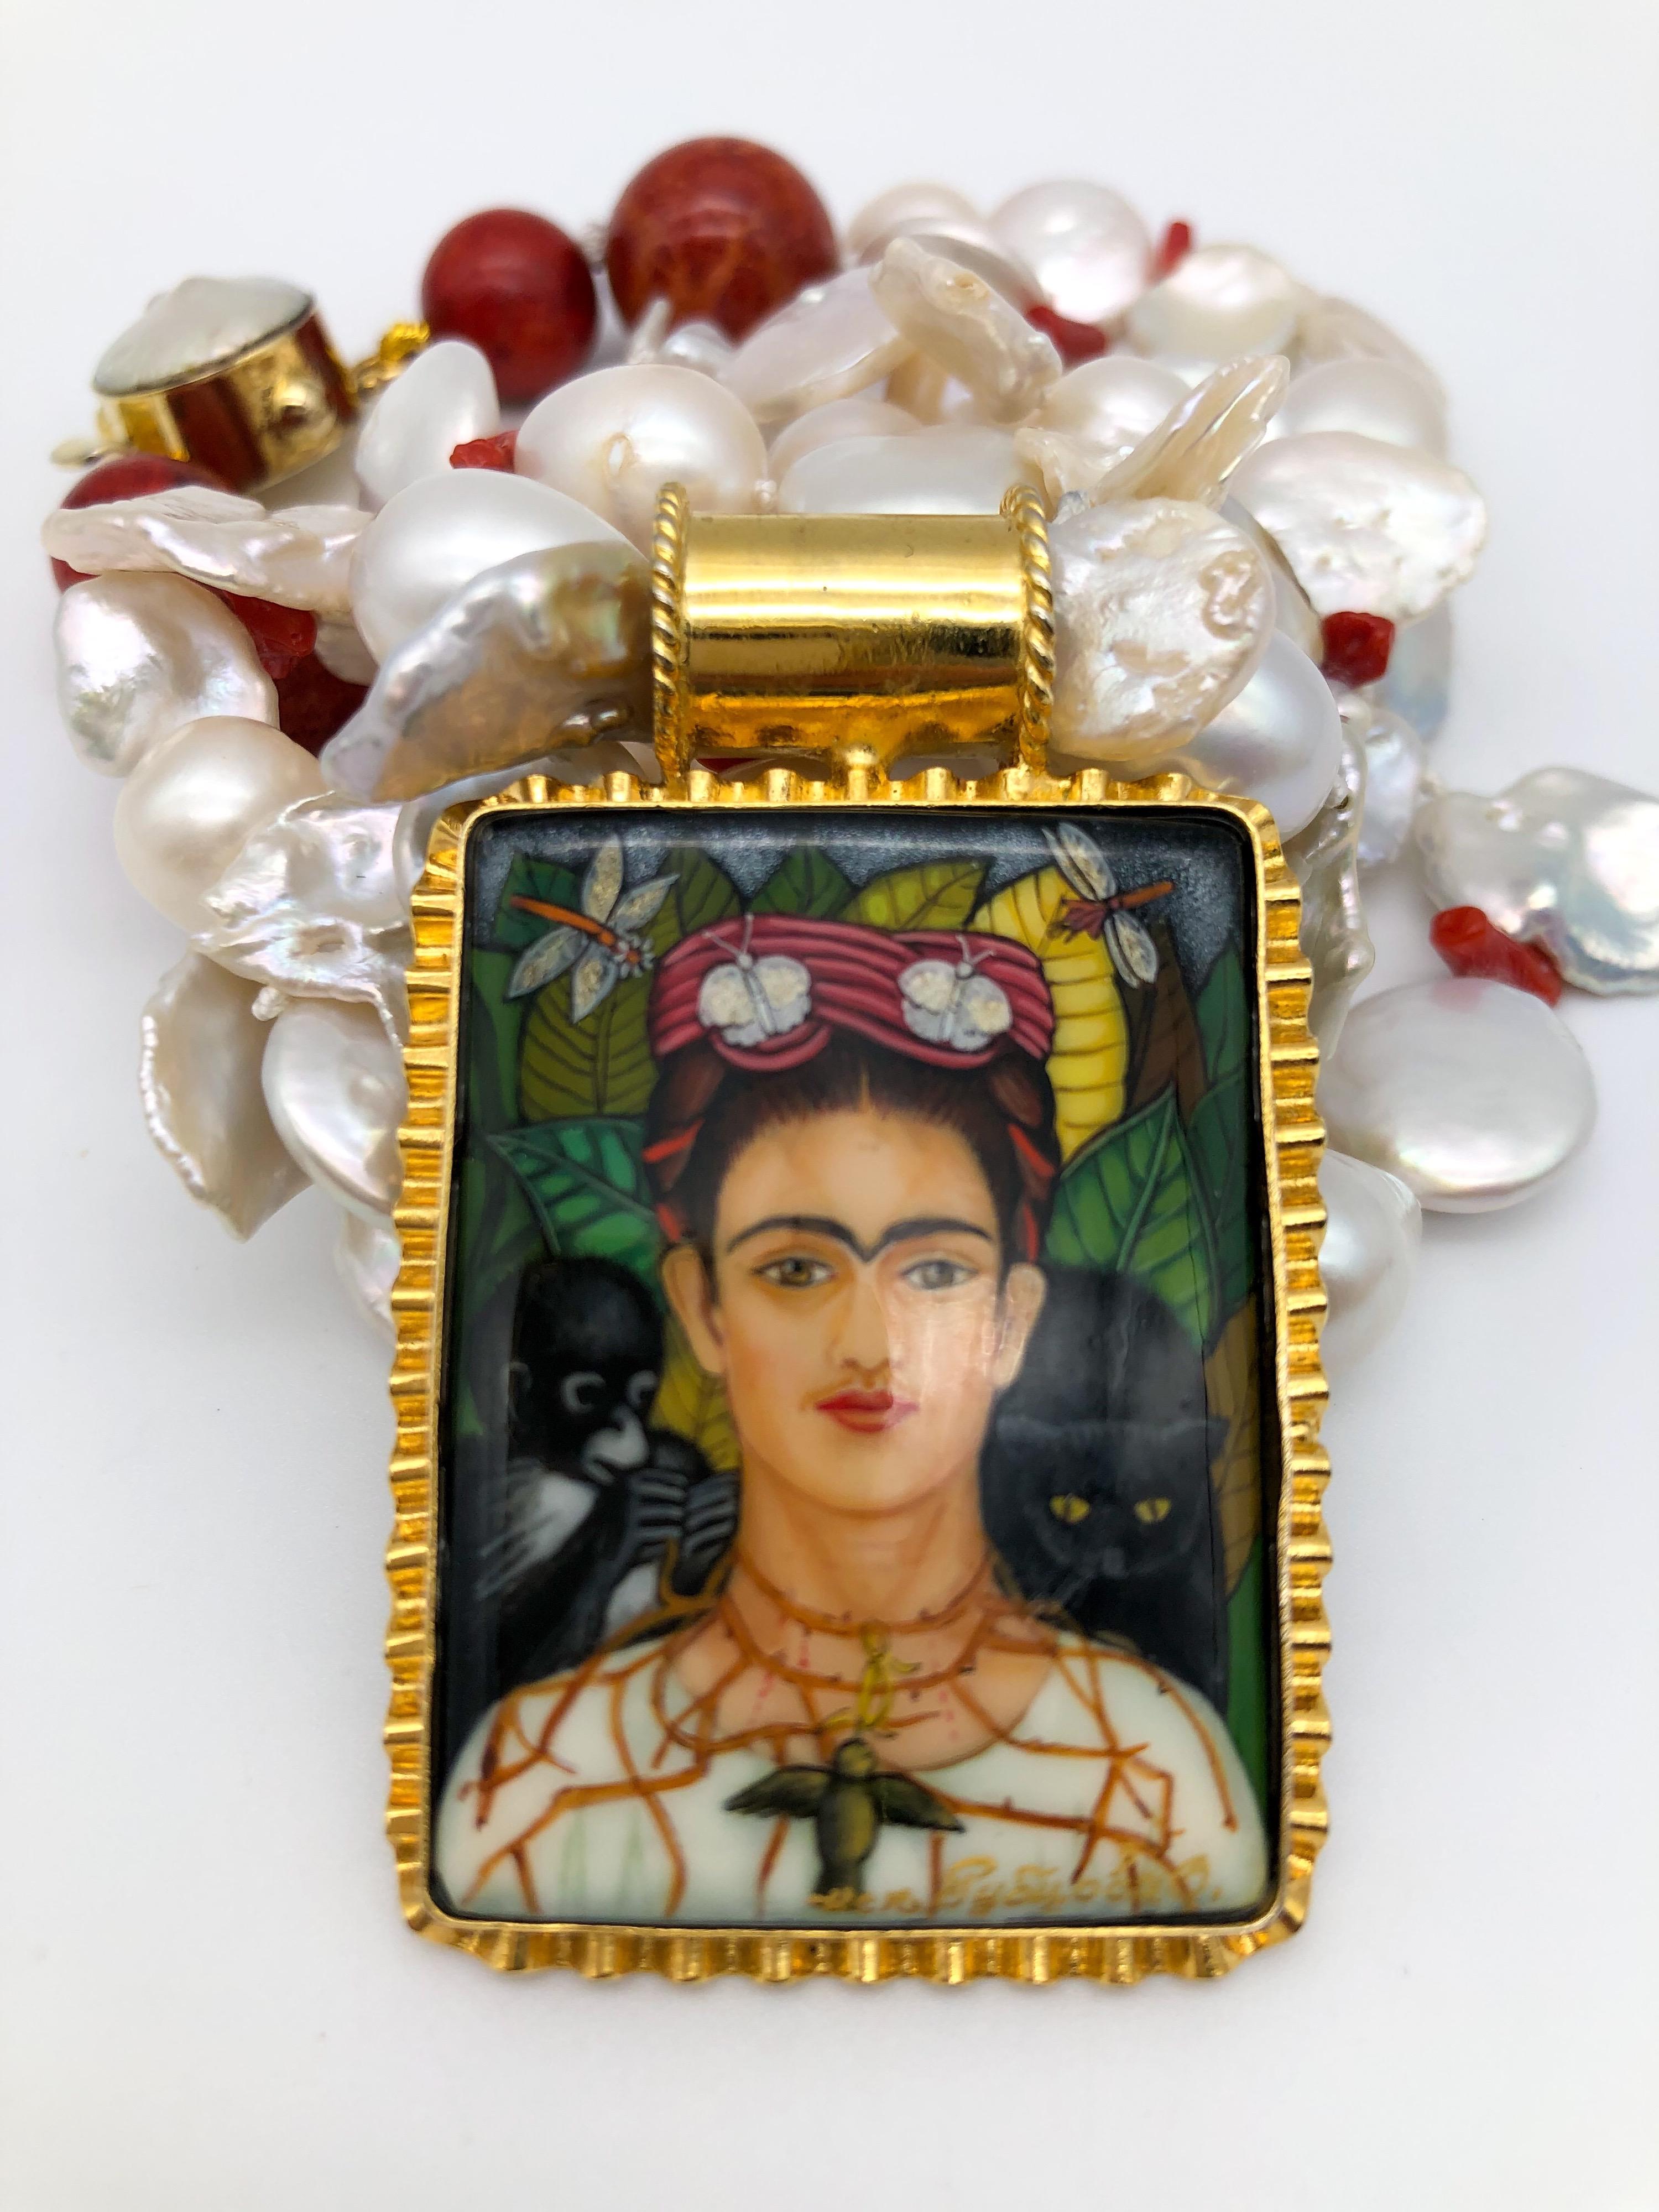 One-of-a-Kind

Sensational hand-painted miniature after Frida Kahlo’s Self-Portrait with Thorn( including the monkeys) Glorious hand-painted miniature portrait on Onyx. Set in a vermeil frame. Mixed coin and baroque pearl double strand complement